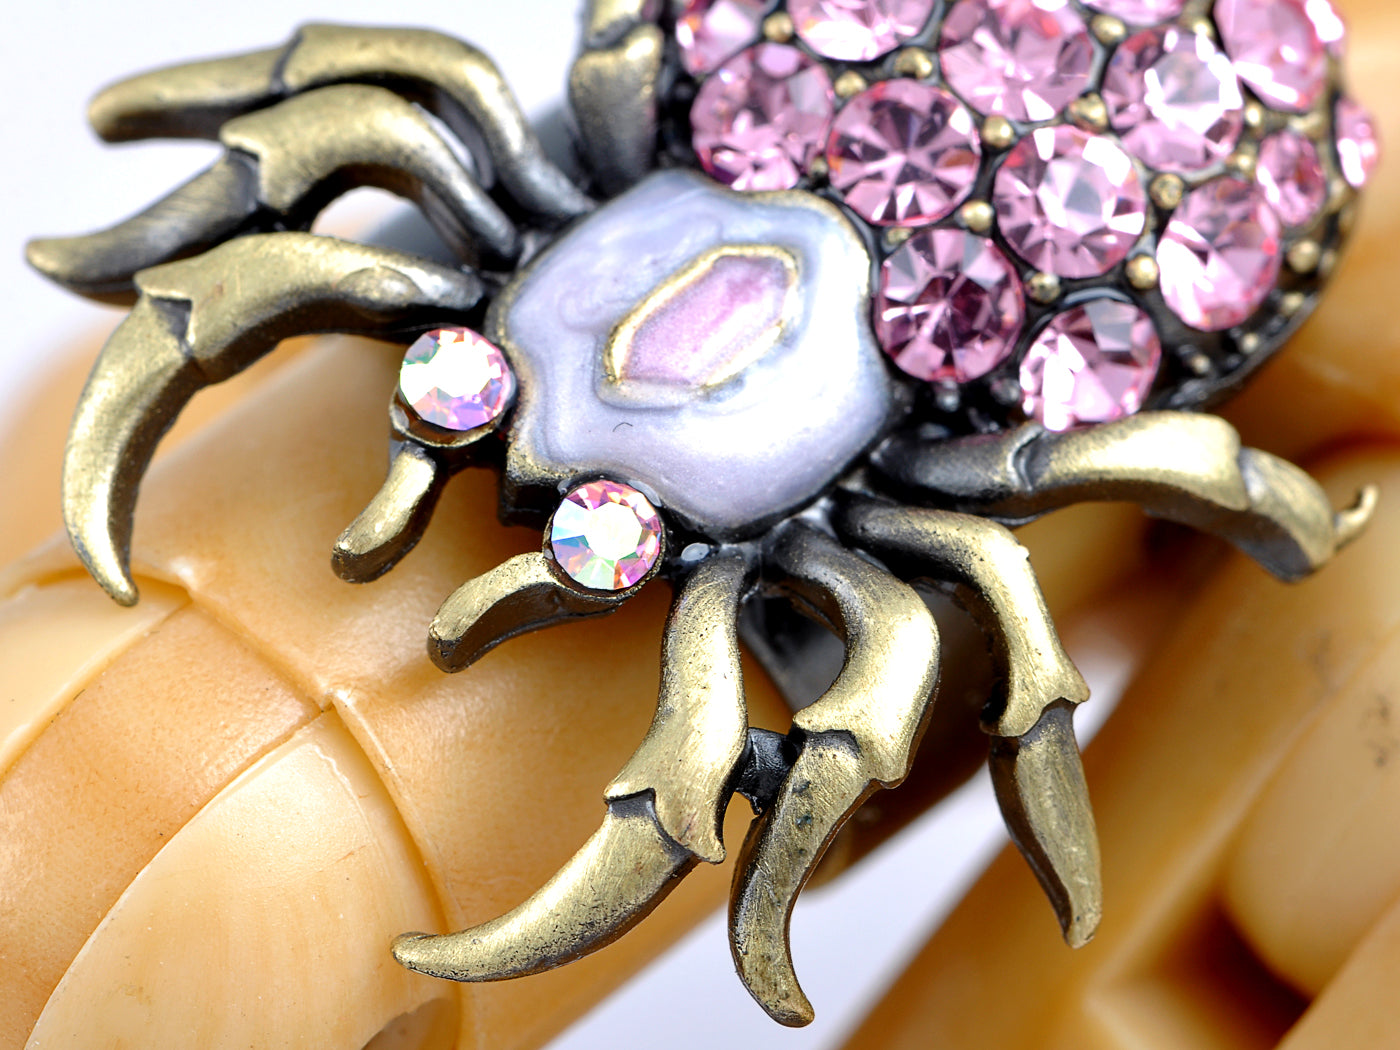 Rose Pink Body Spider Insect Bug Design Jewelry Ring